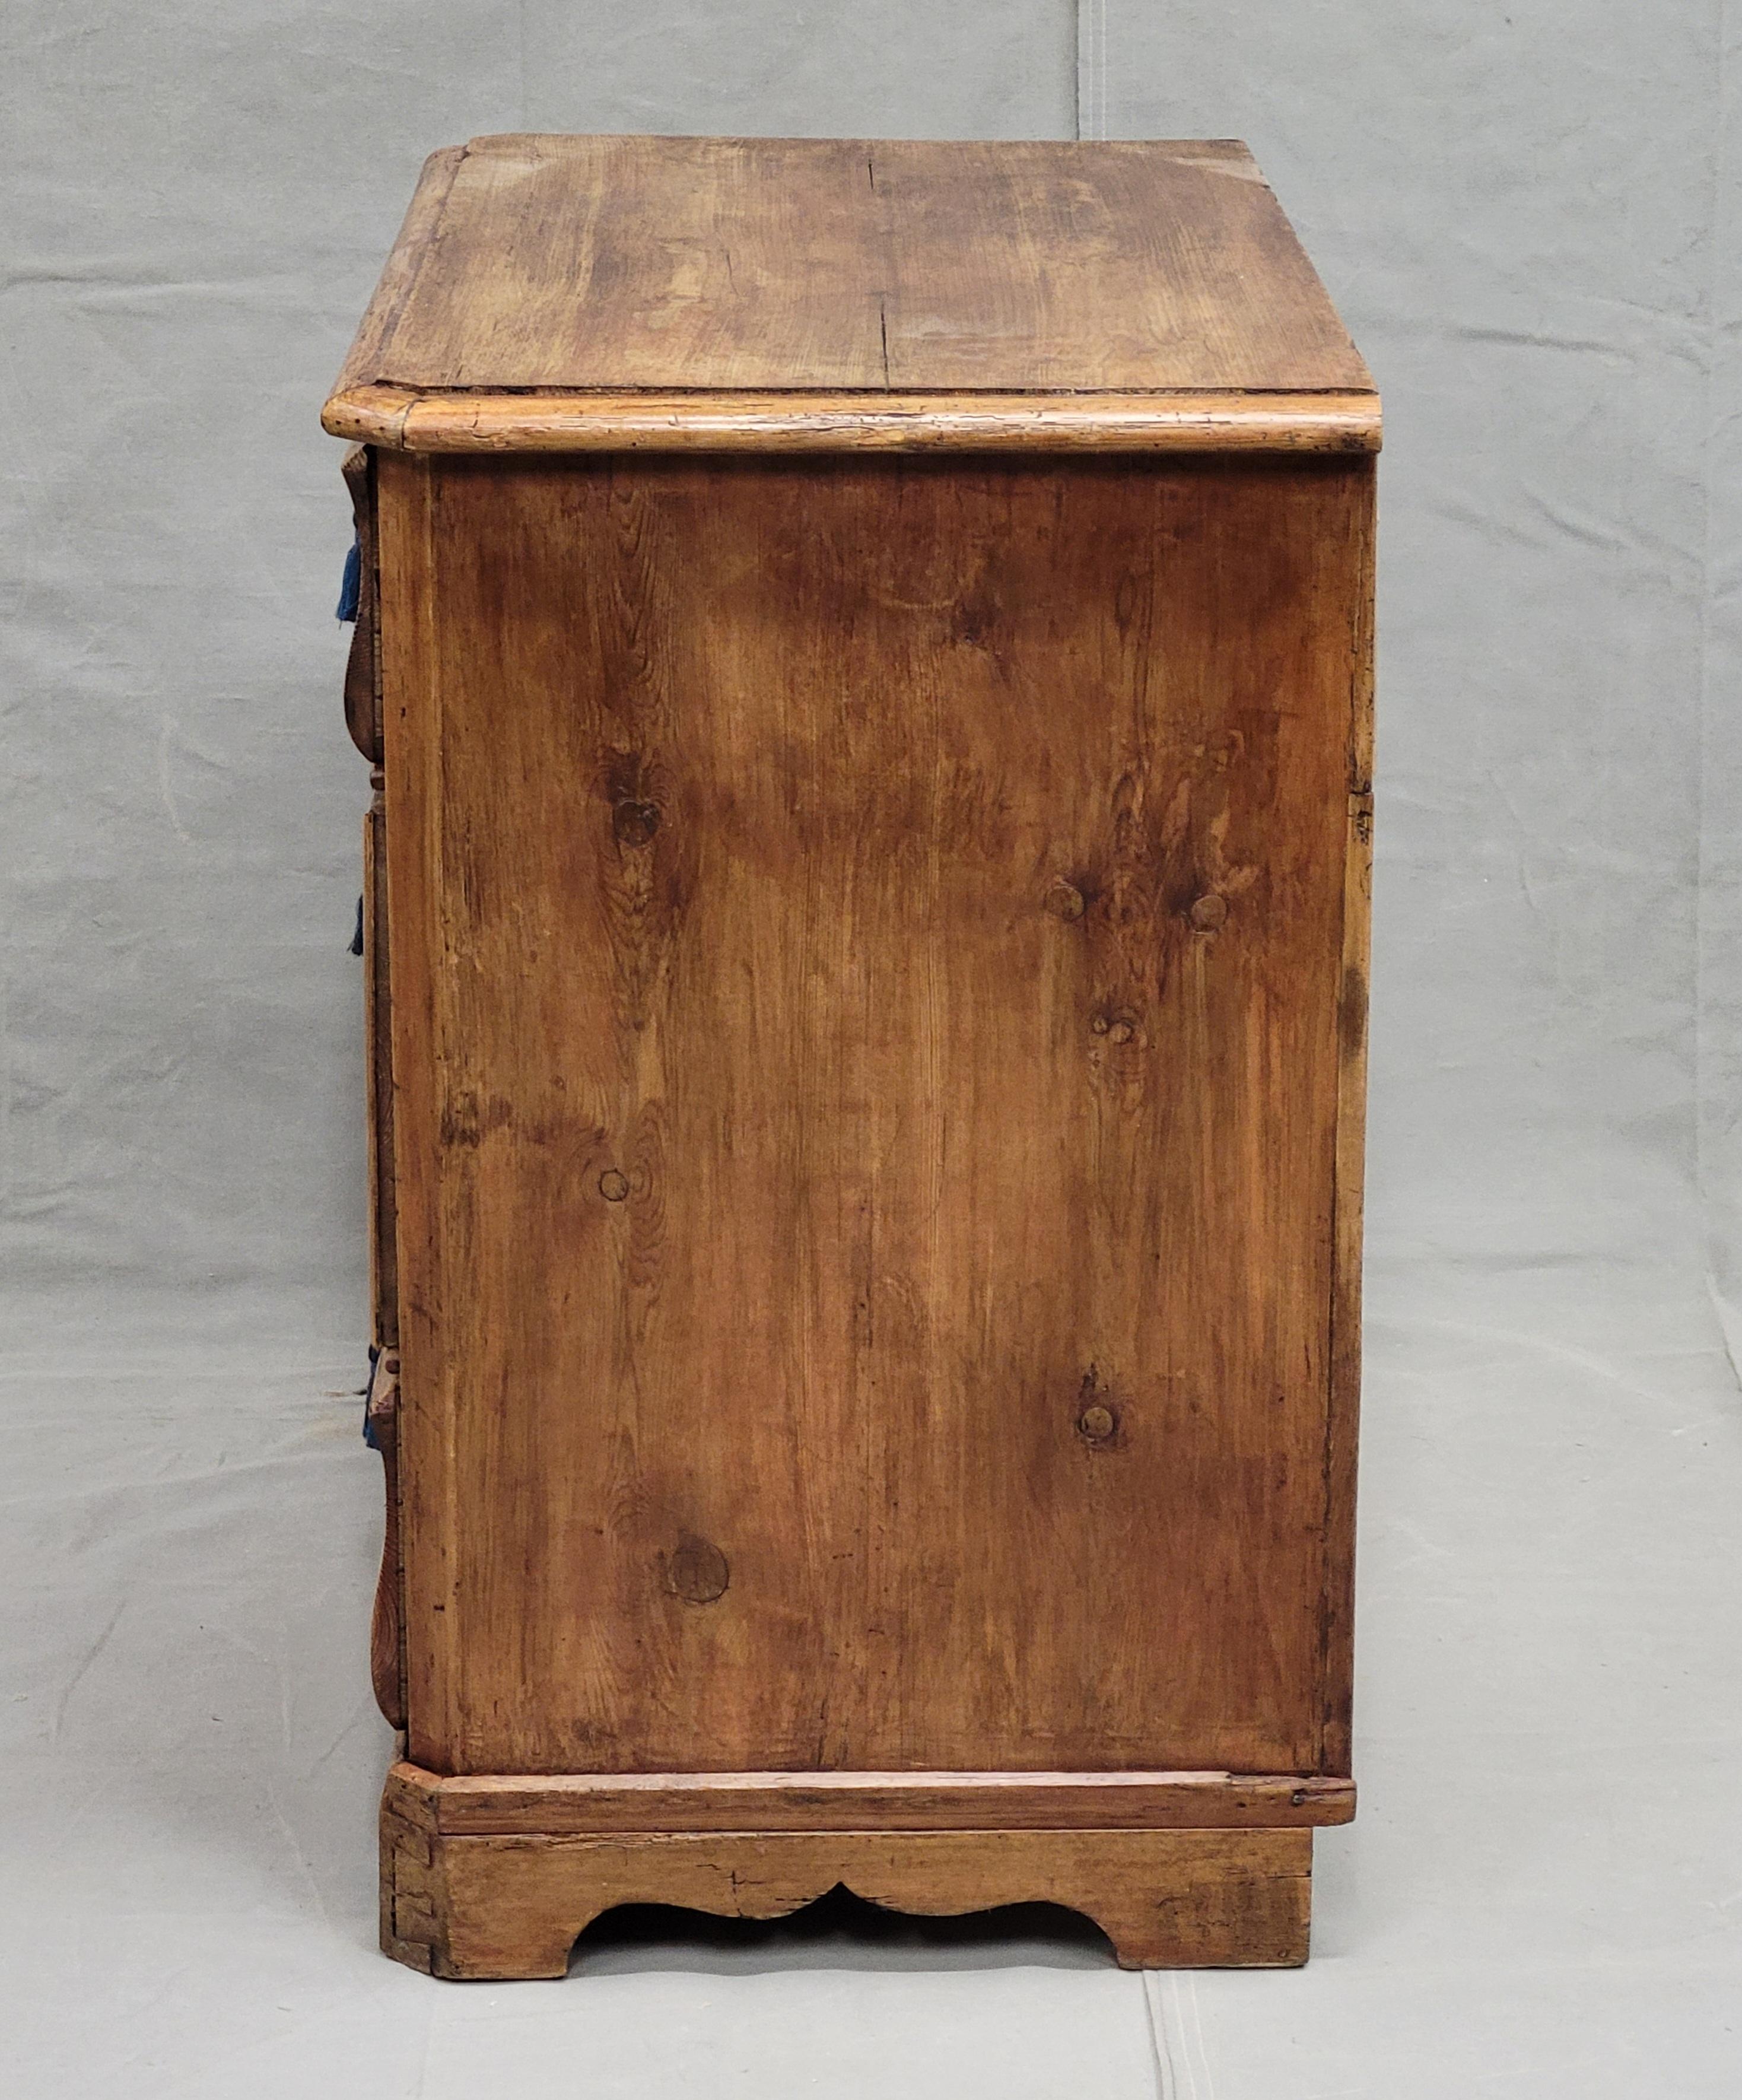 Antique Mid 1800s Swedish or Danish Pine Chest of Drawers Dresser For Sale 4